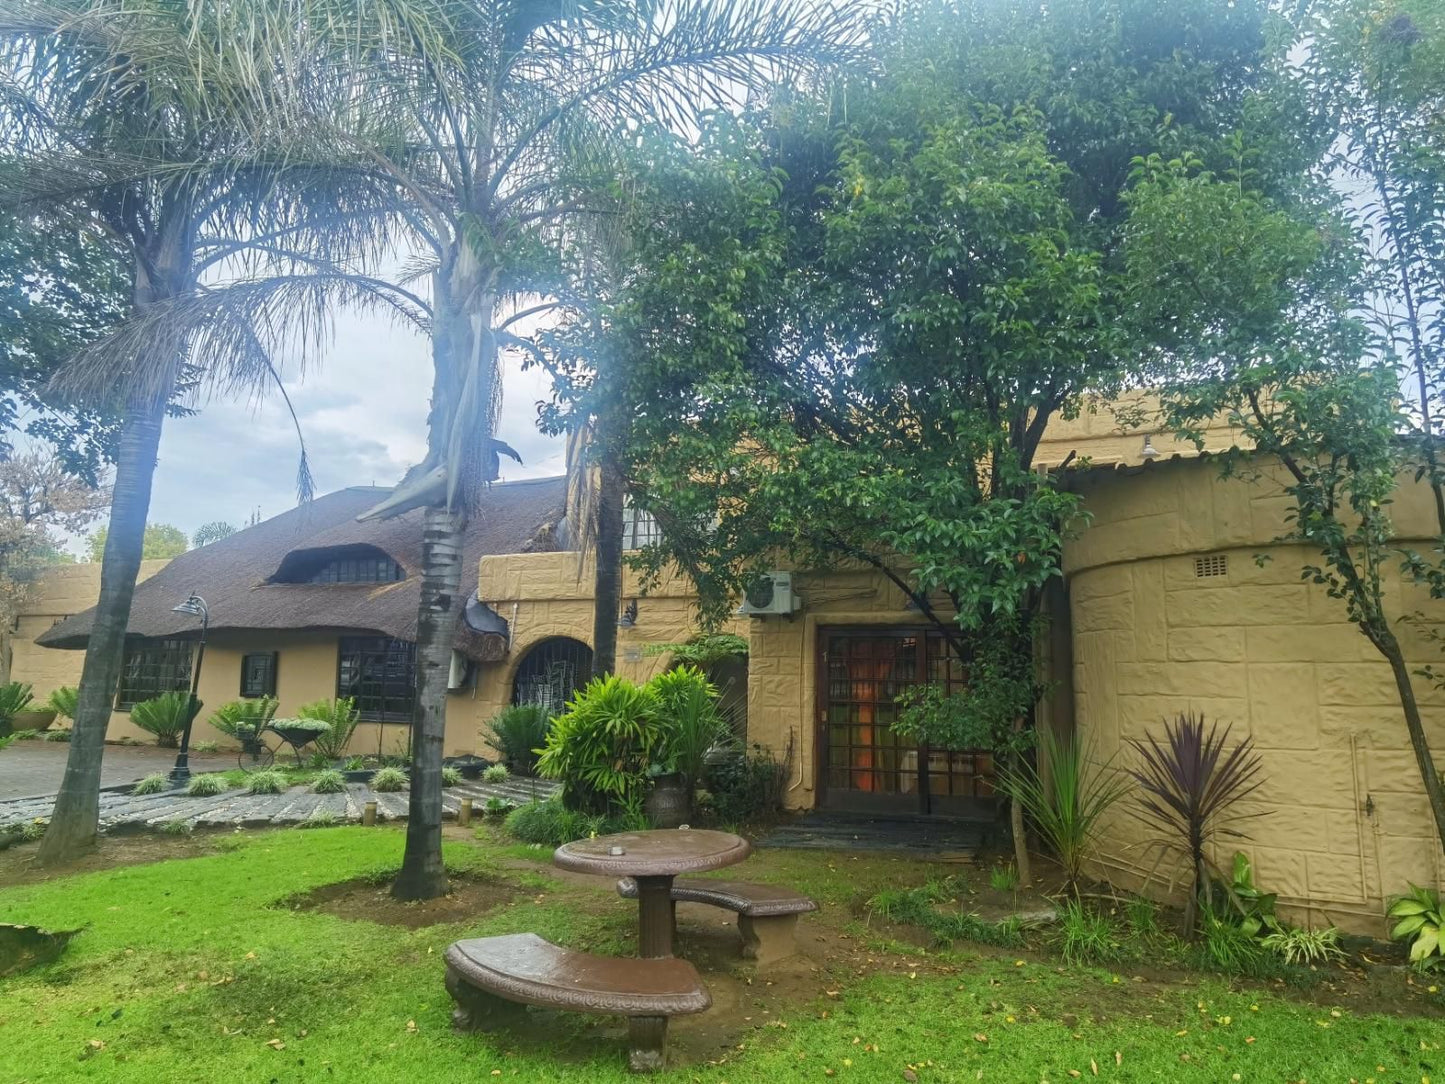 Camelot Boutique Hotel Hutten Heights Newcastle Kwazulu Natal South Africa House, Building, Architecture, Palm Tree, Plant, Nature, Wood